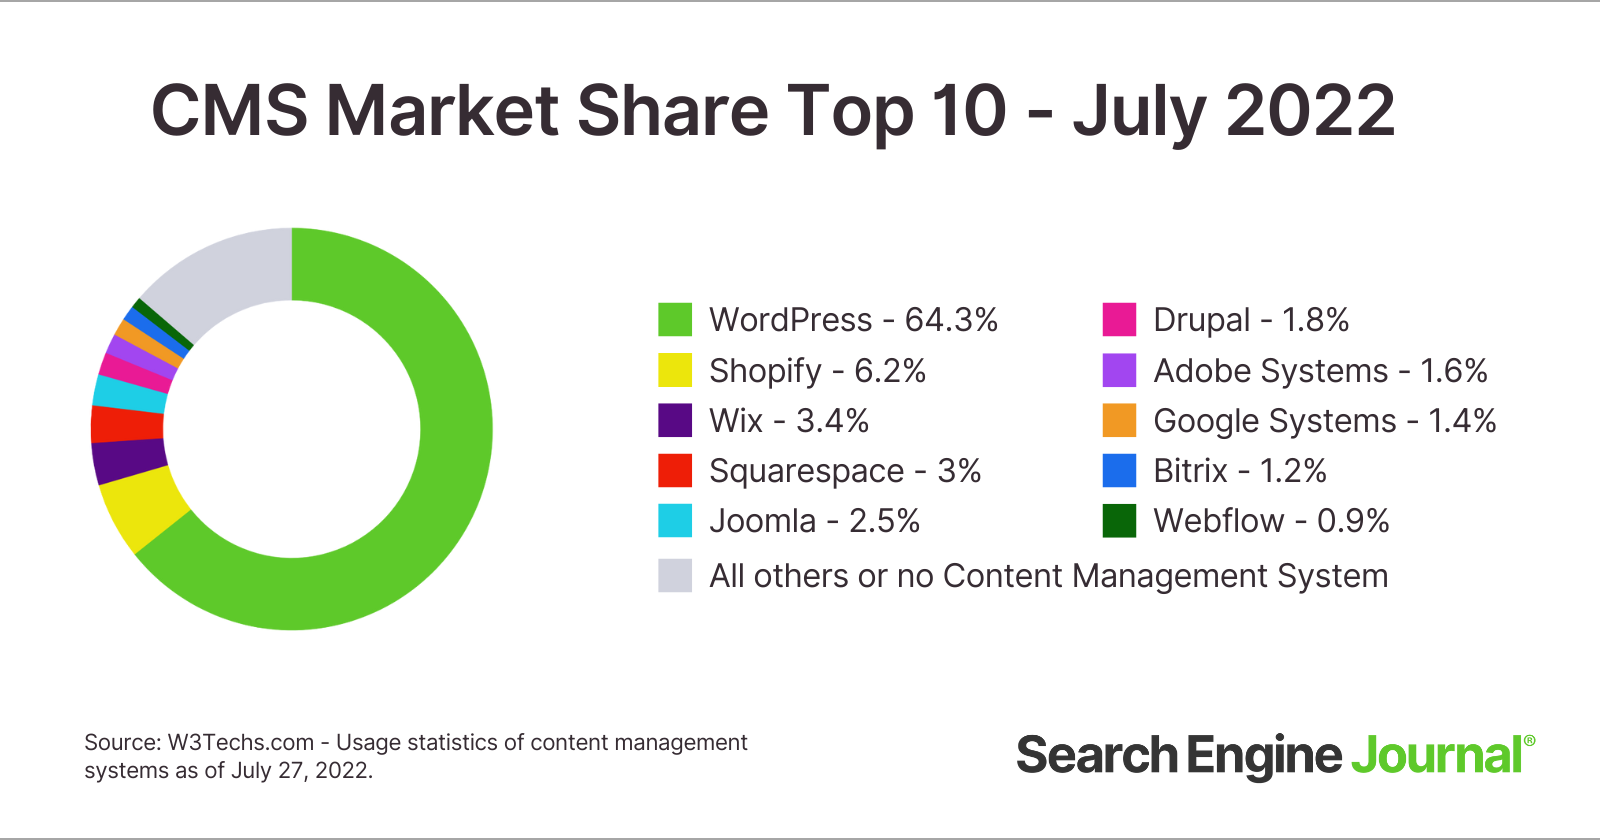 WordPress continued to dominate CMS market share in July, with Shopify losing 0.1% to WP.